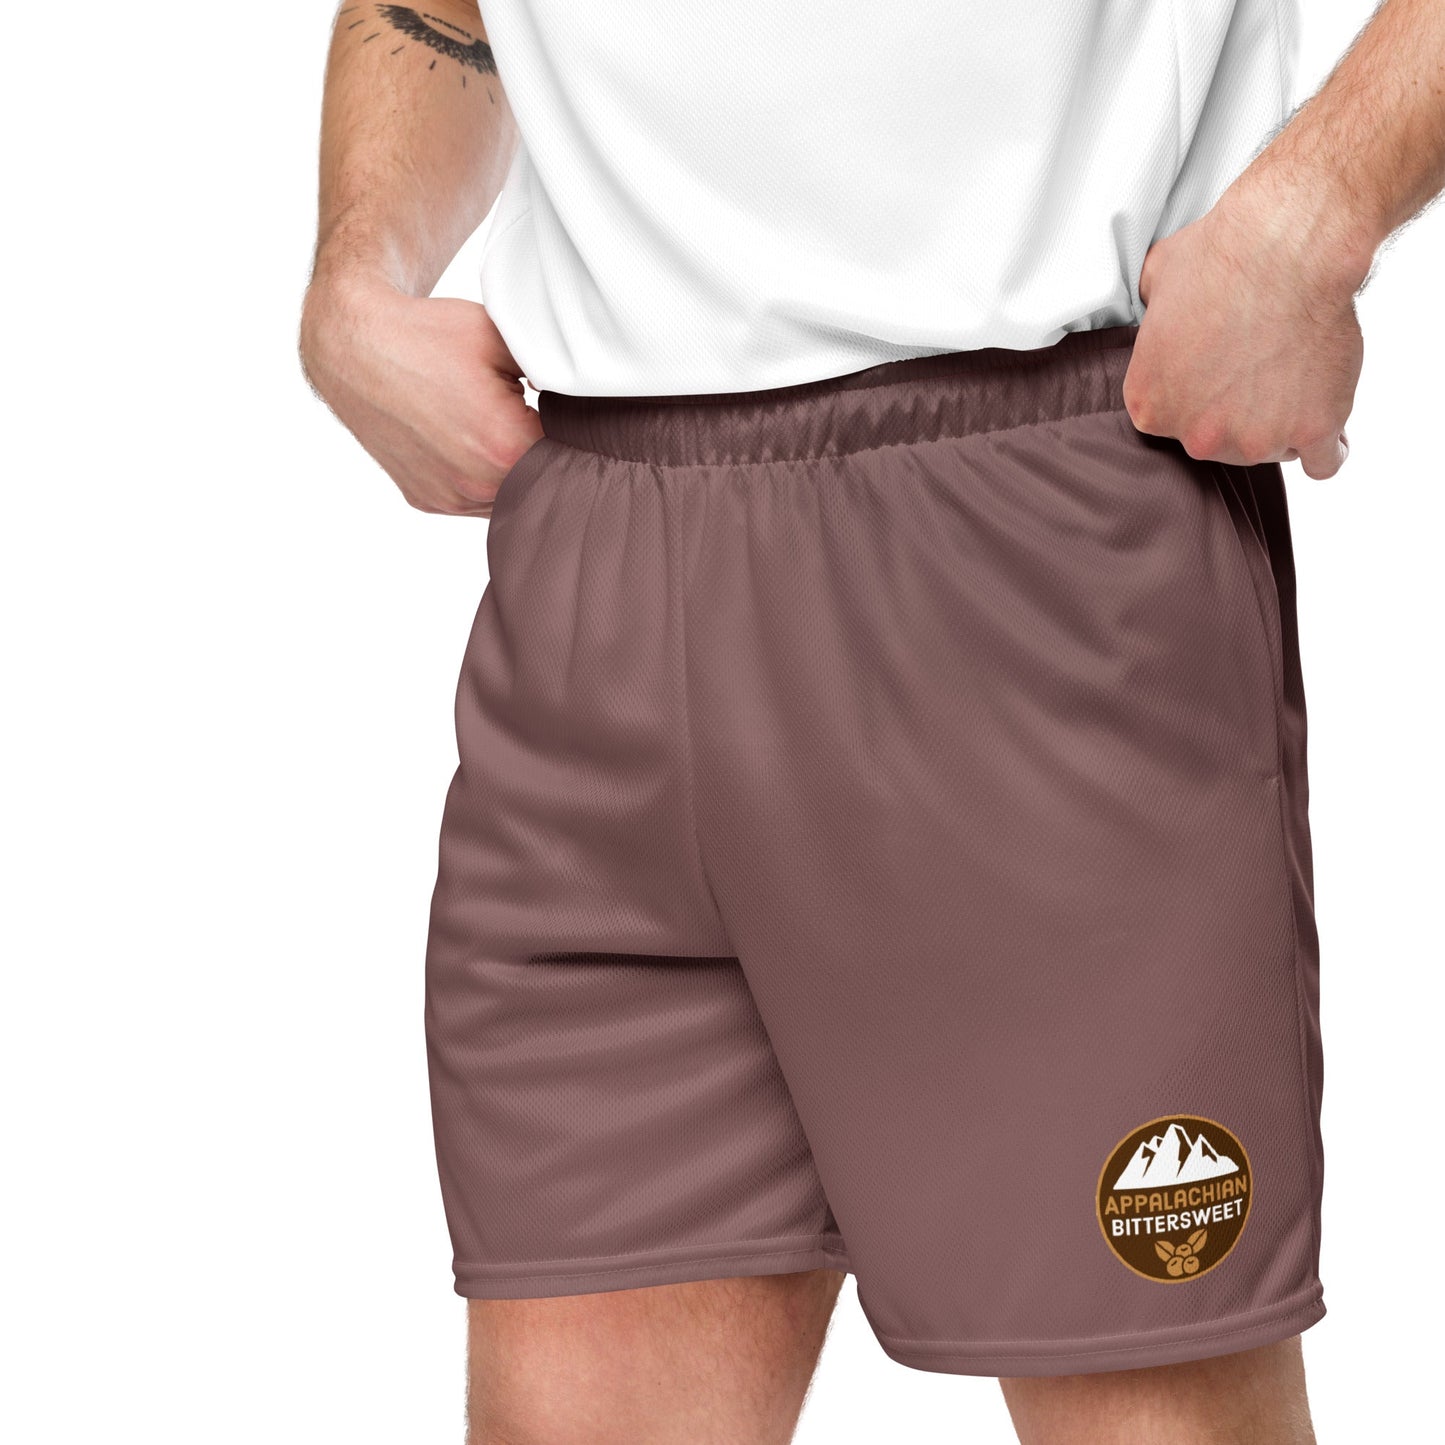 Frosted Berry Recycled Unisex Comfort Mesh Hiking Shorts - Appalachian Bittersweet - Shorts